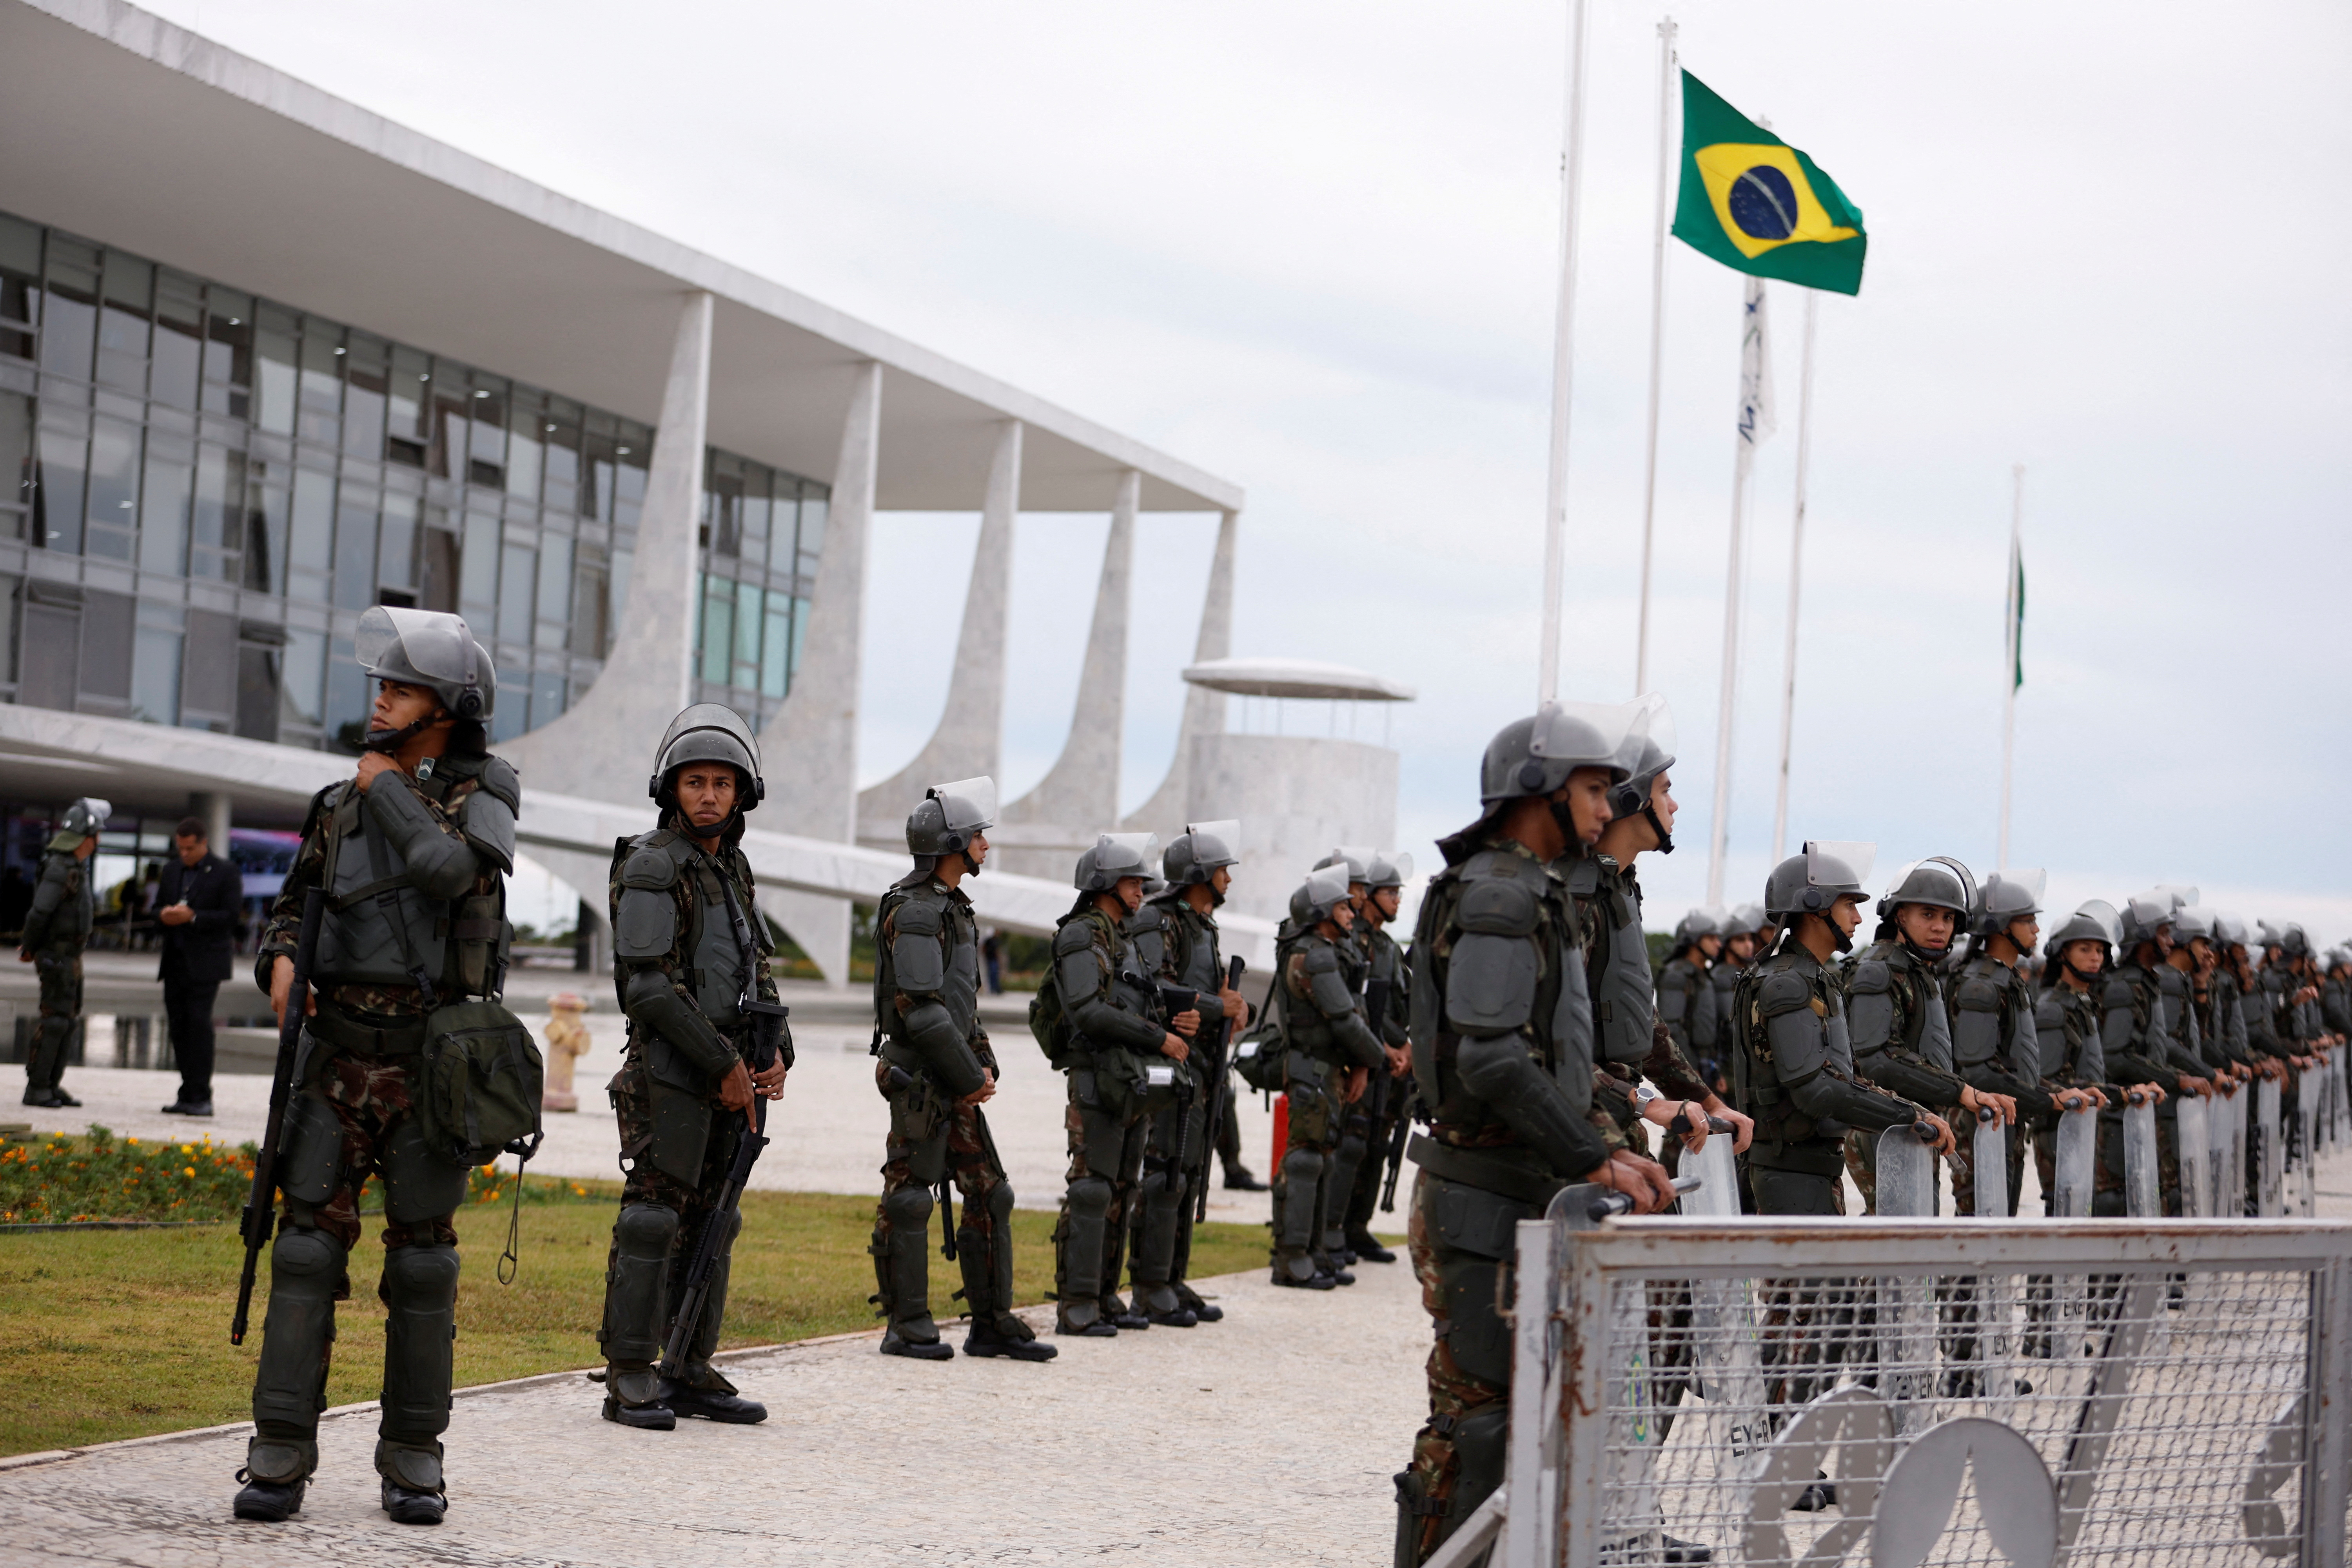 Army officers stand guard in front of the Planalto Palace, in Brasilia, Brazil, January 11, 2023 (REUTERS/Amanda Perobelli)